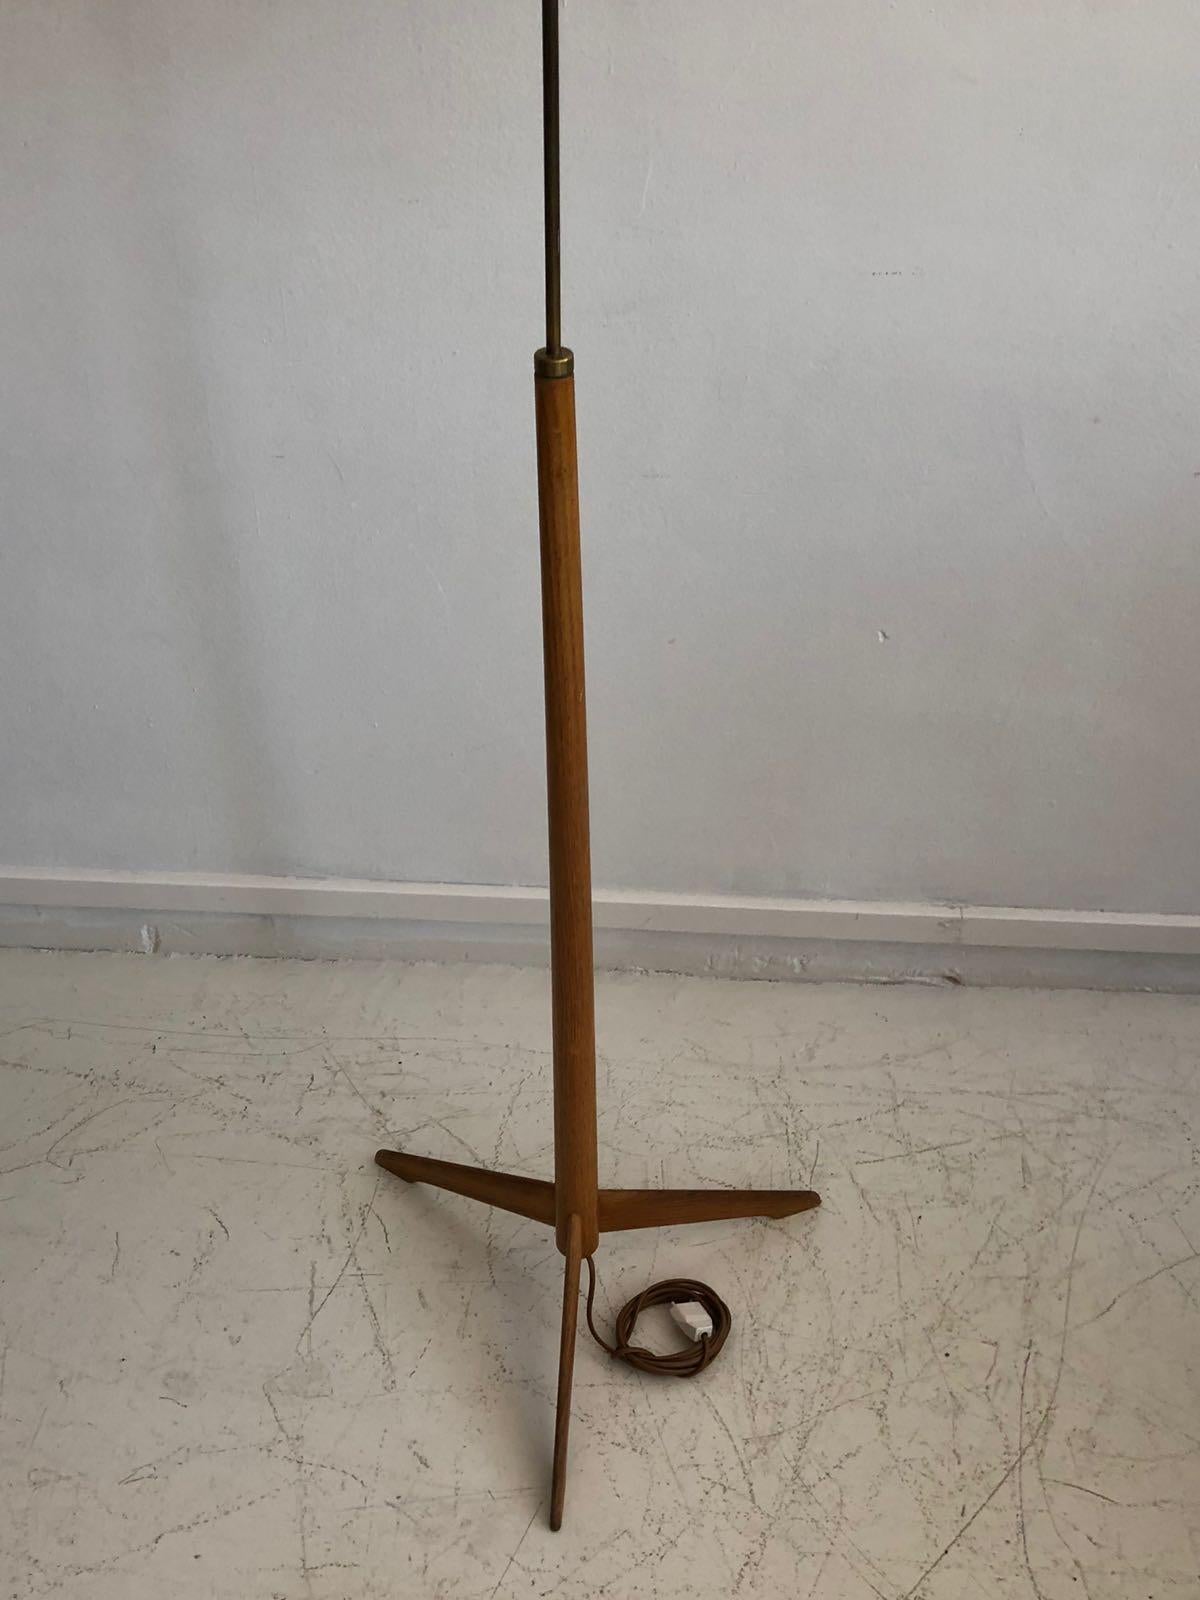 20th Century Scandinavian Modern Floor Lamp with Wooden Stand by Bergboms